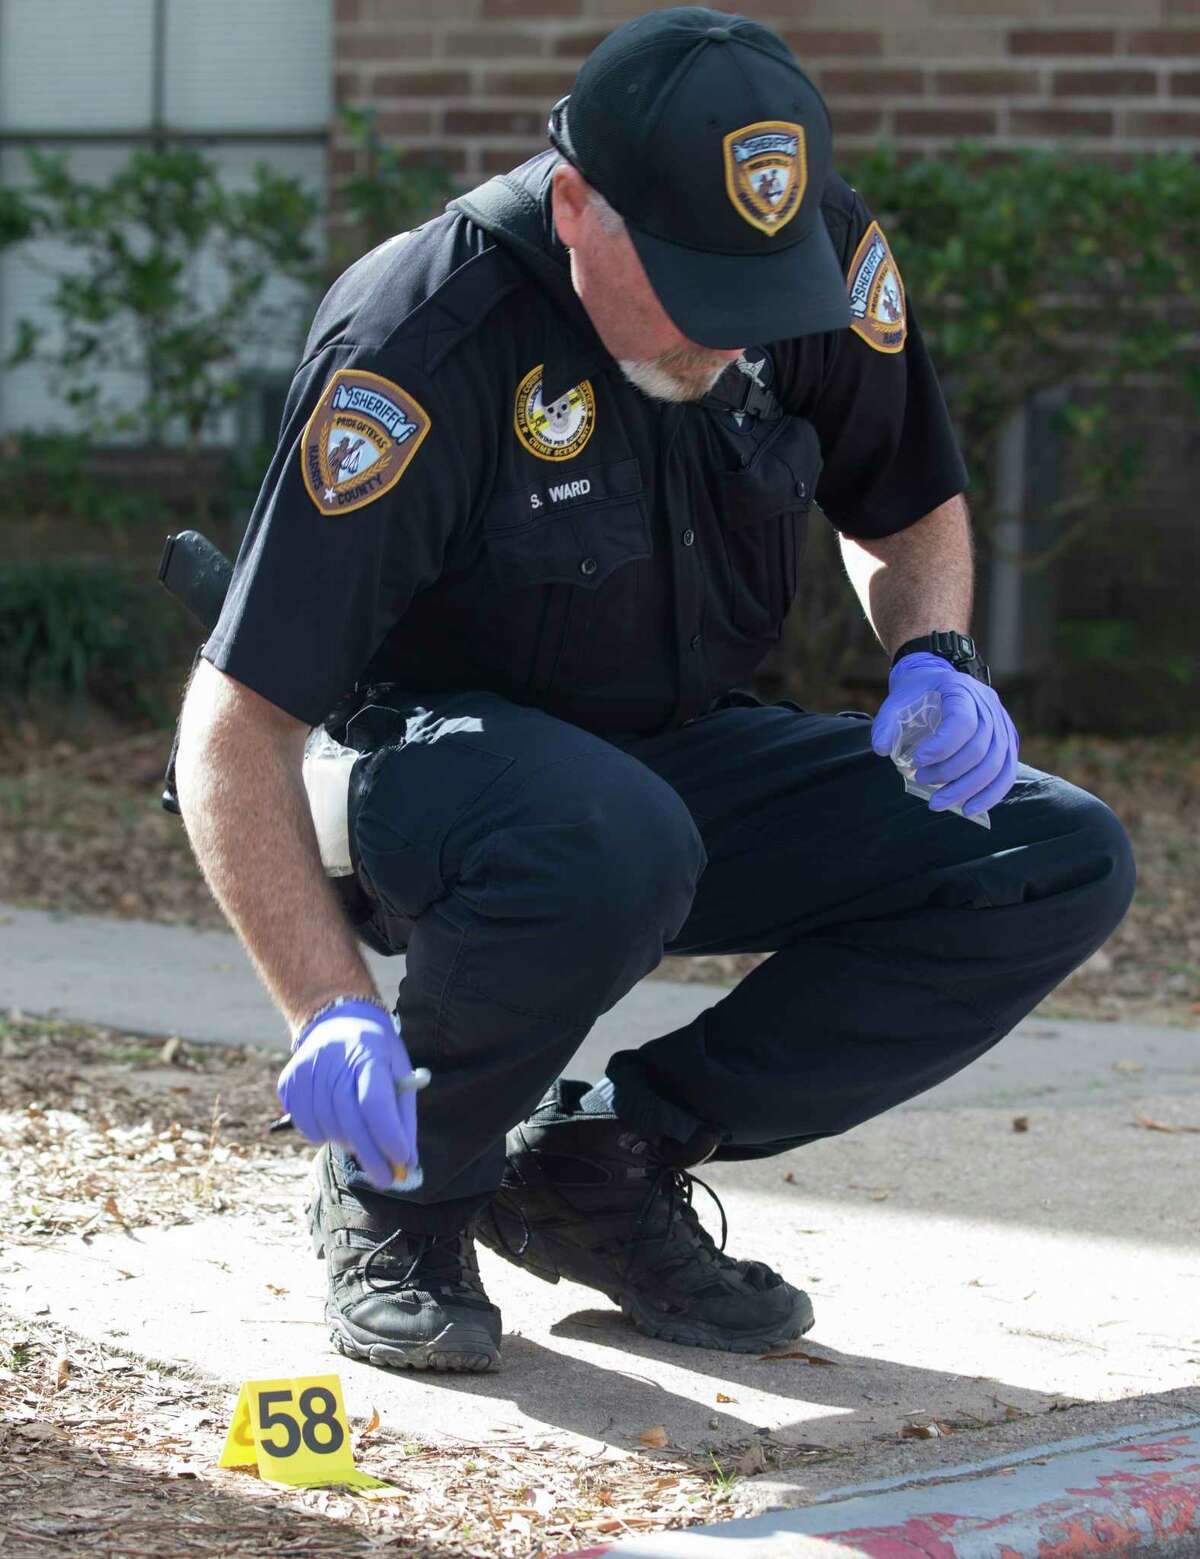 A Harris County Sheriff's Office Crime Scene Unit investigator investigate the scene where a 15-year-old boy shot 17-year-old girlfriend in the leg at an apartment complex on the 300 block of Parrametta Lane on Wednesday, Dec. 25, 2019, in Houston. It was unclear whether it was accidental or intentional, Sheriff Ed Gonzalez said. The victim was taken to the hospital and in stable condition.